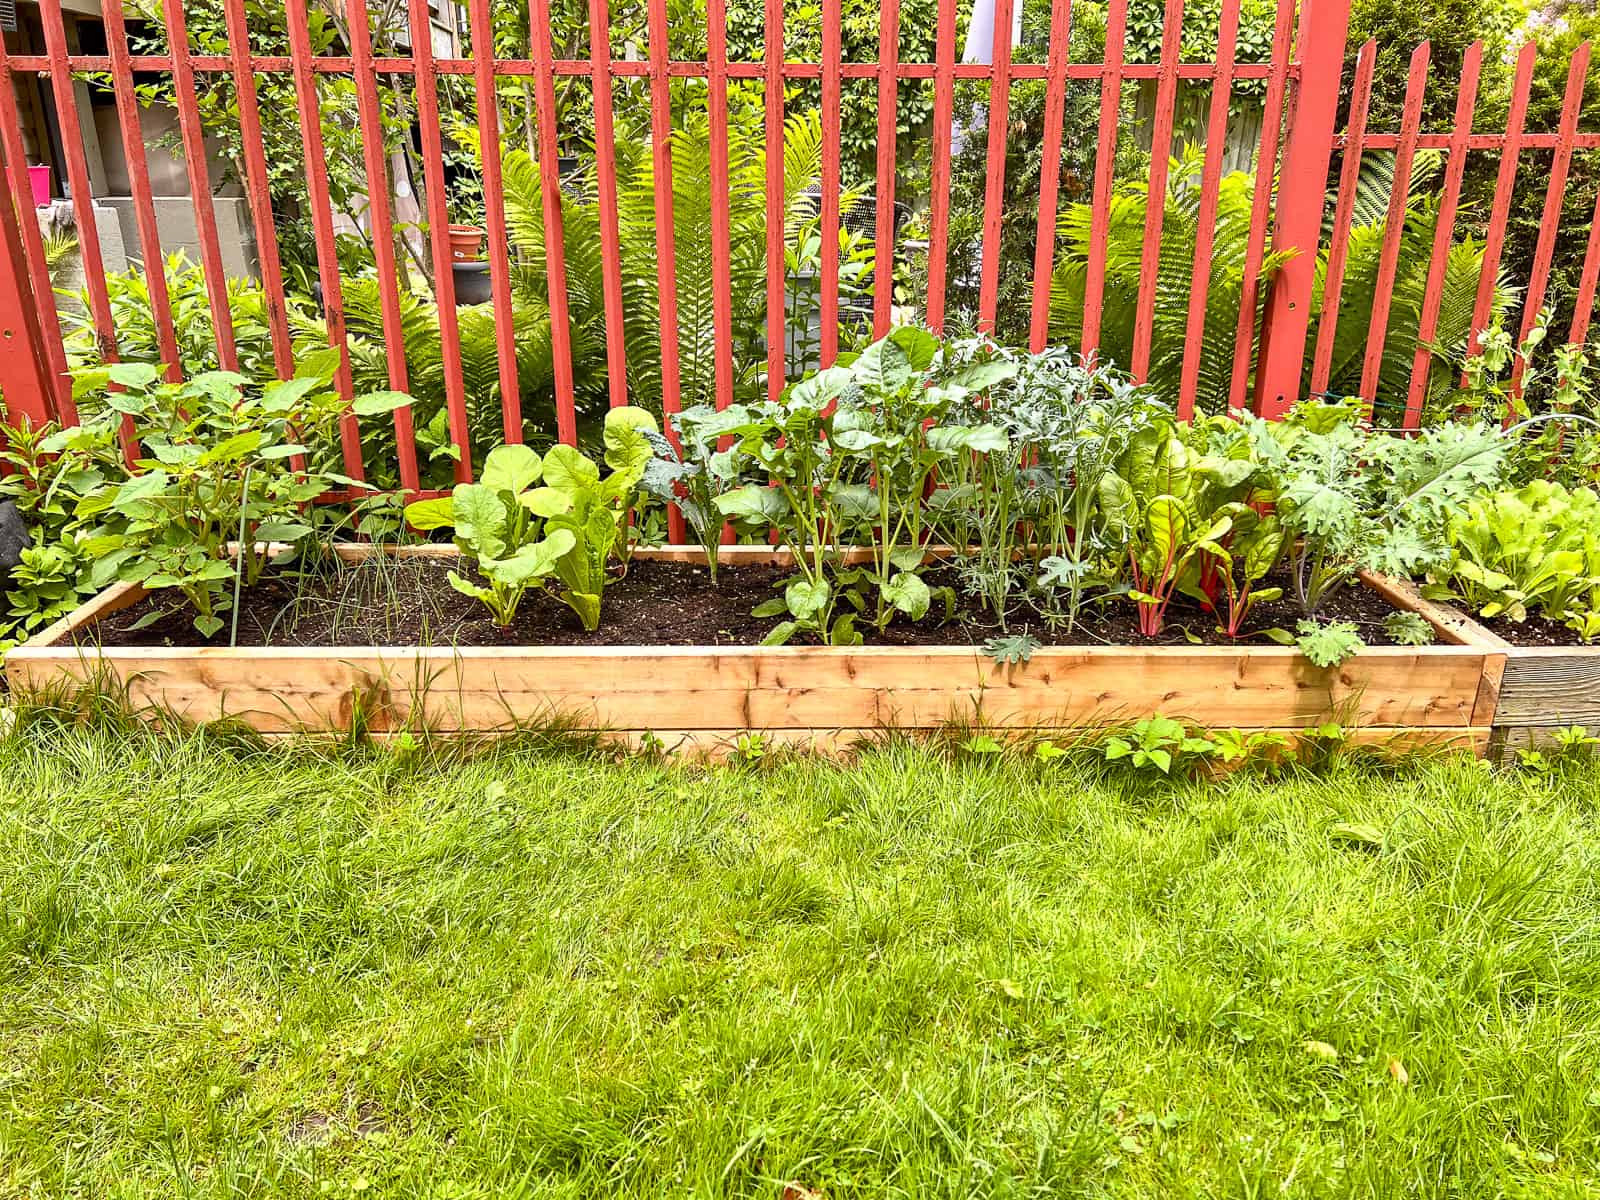 An image of a Square Foot Garden in raised beds, mid season, and full of edible plants.